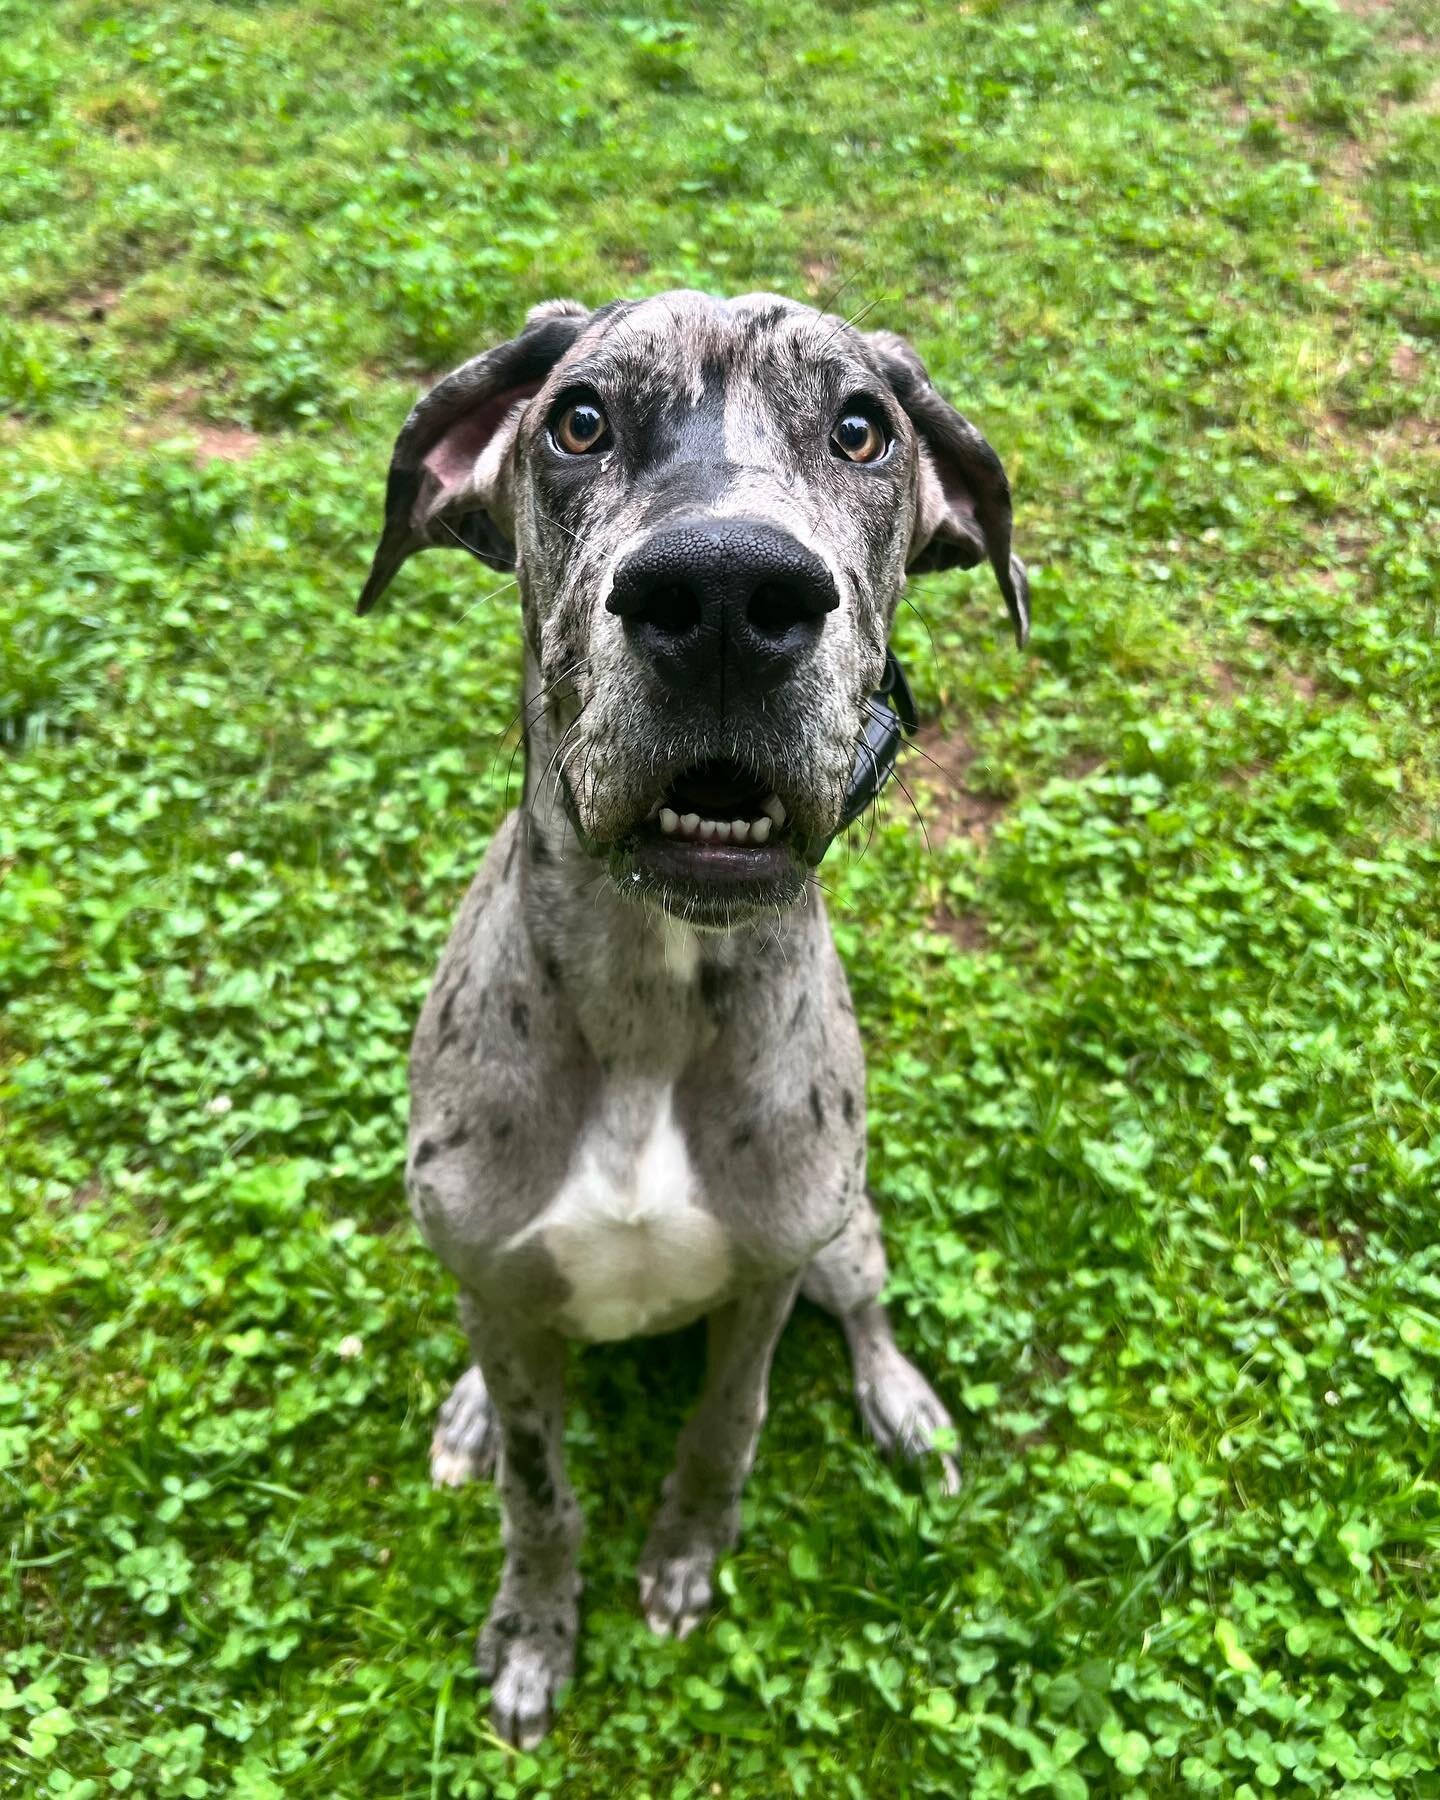 Look who&rsquo;s back! Bueller is now 7 months old and back to continue his advanced training with us! We&rsquo;ll be freshening up his commands he&rsquo;s already learned with us during the puppy program and working on adding some distance, duration